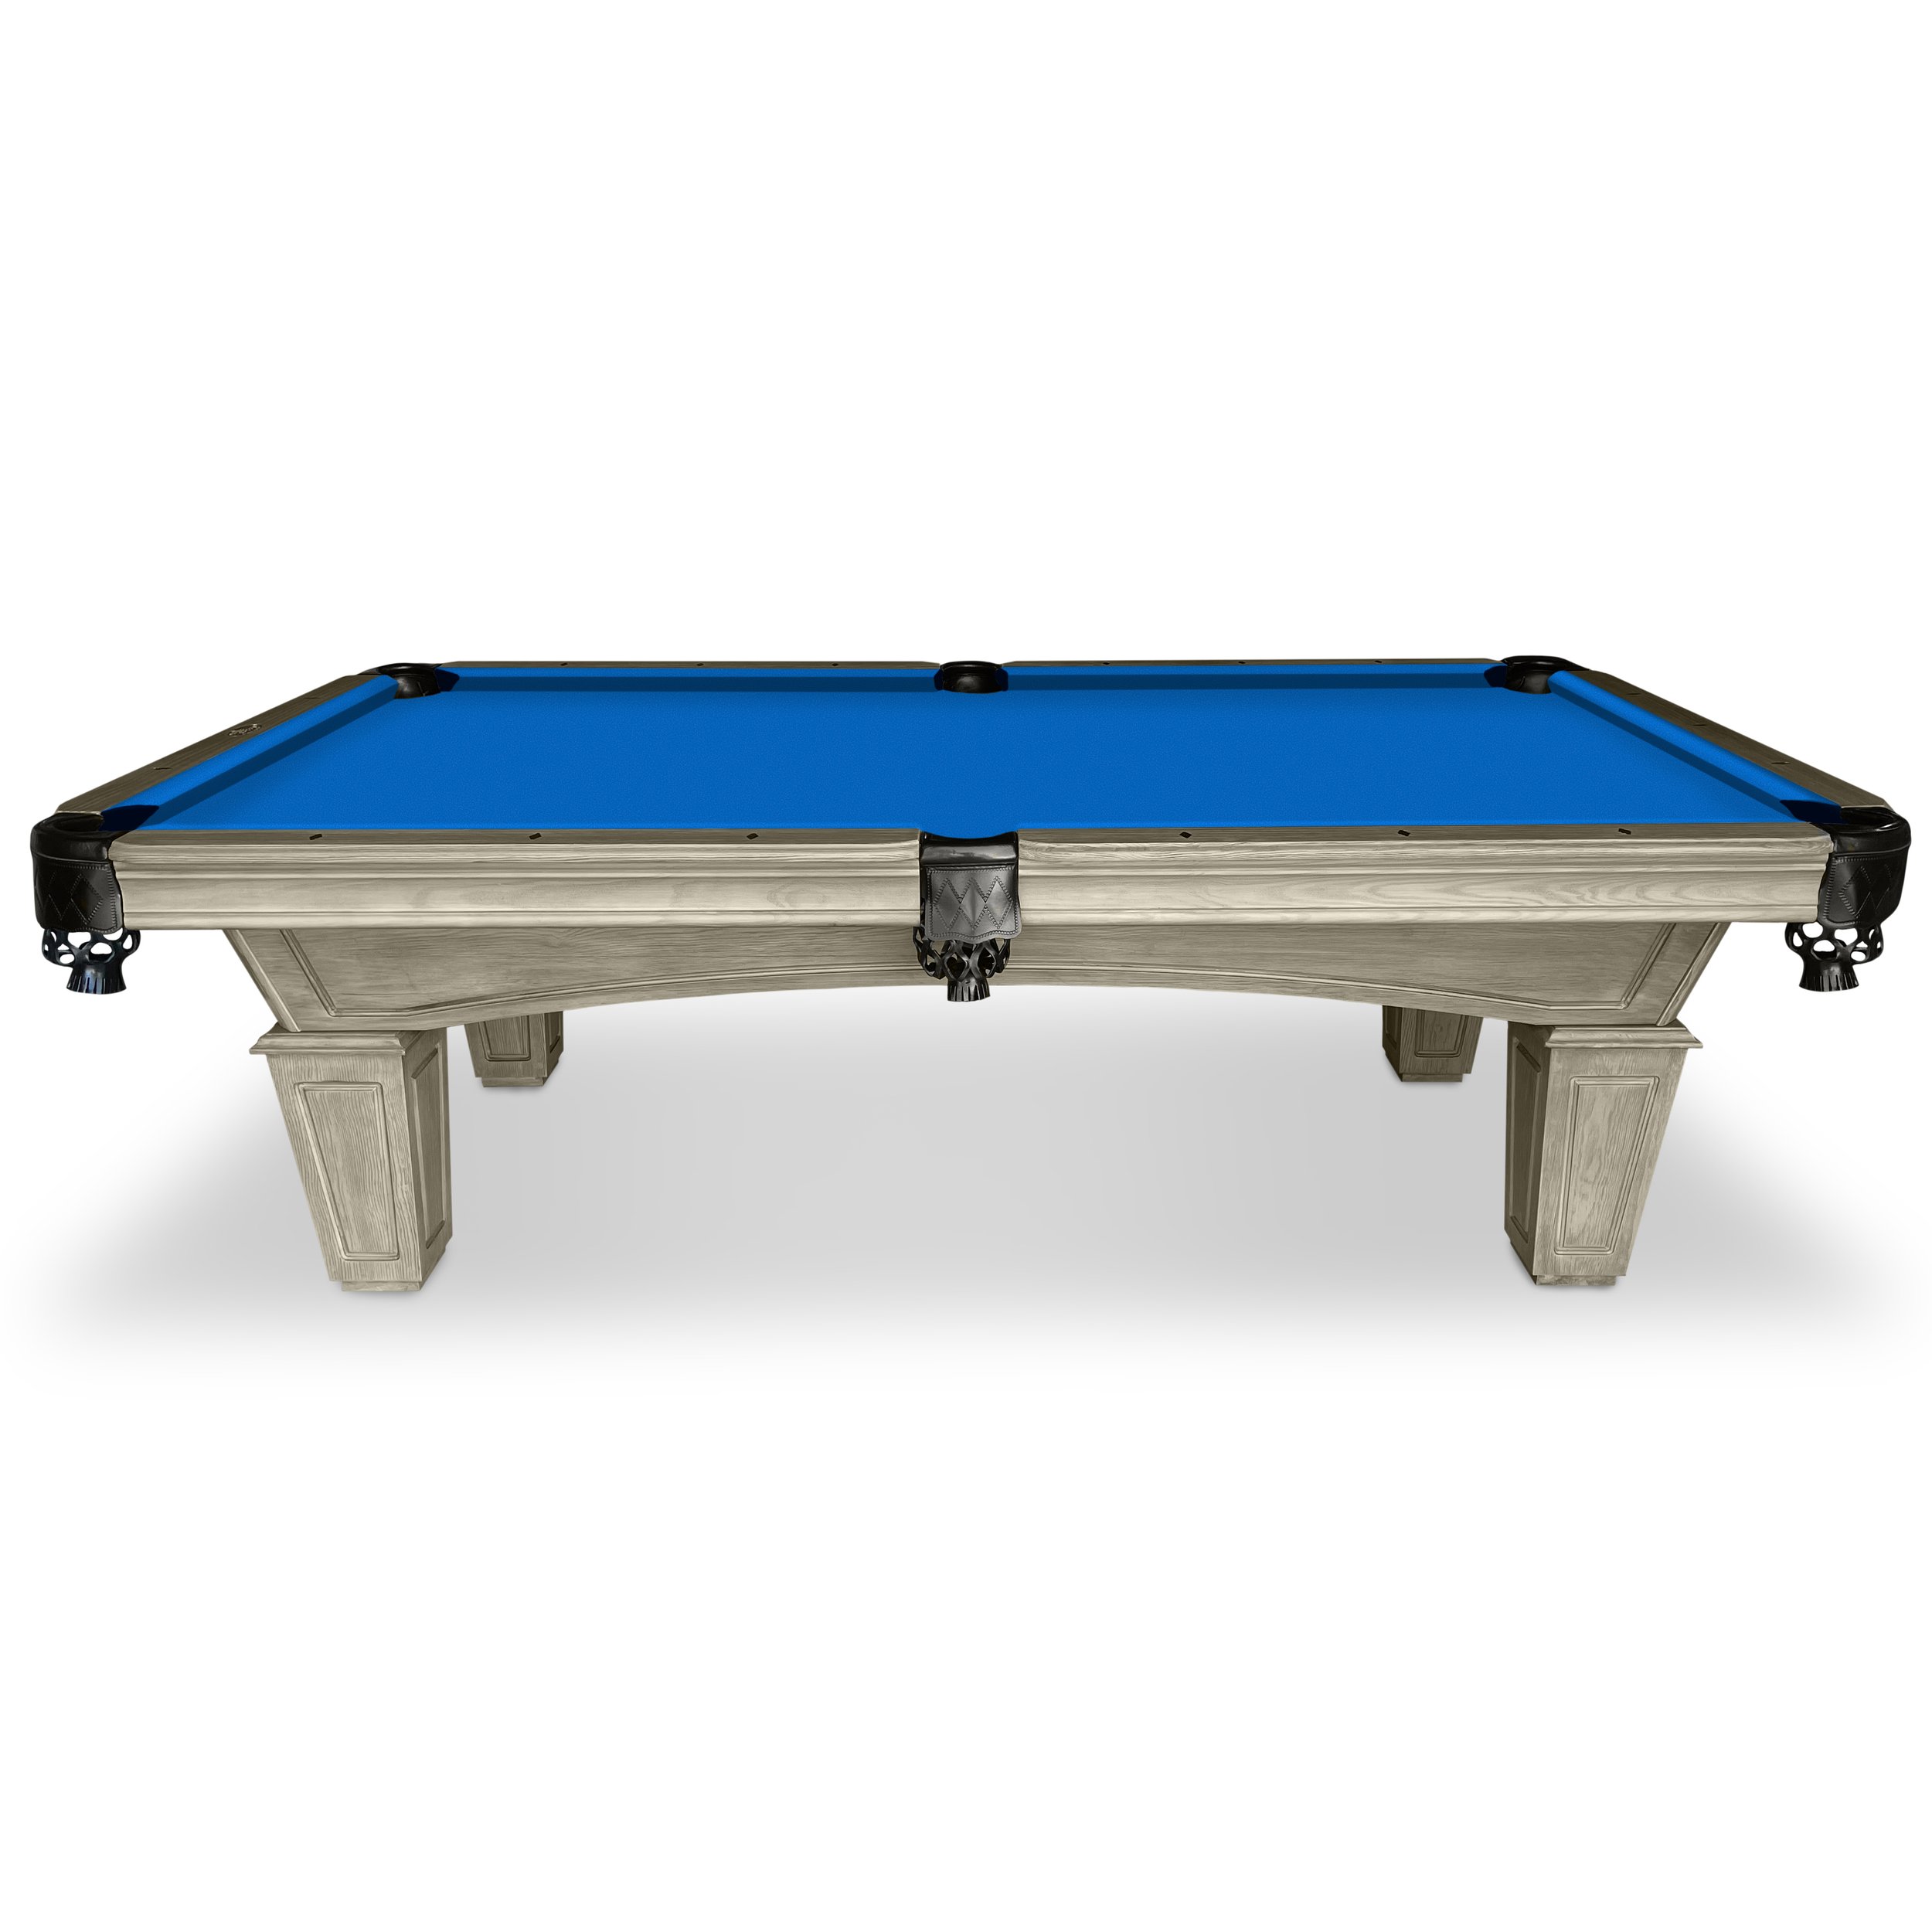 Allenton 8' Pool Table with Ball & Claw Leg